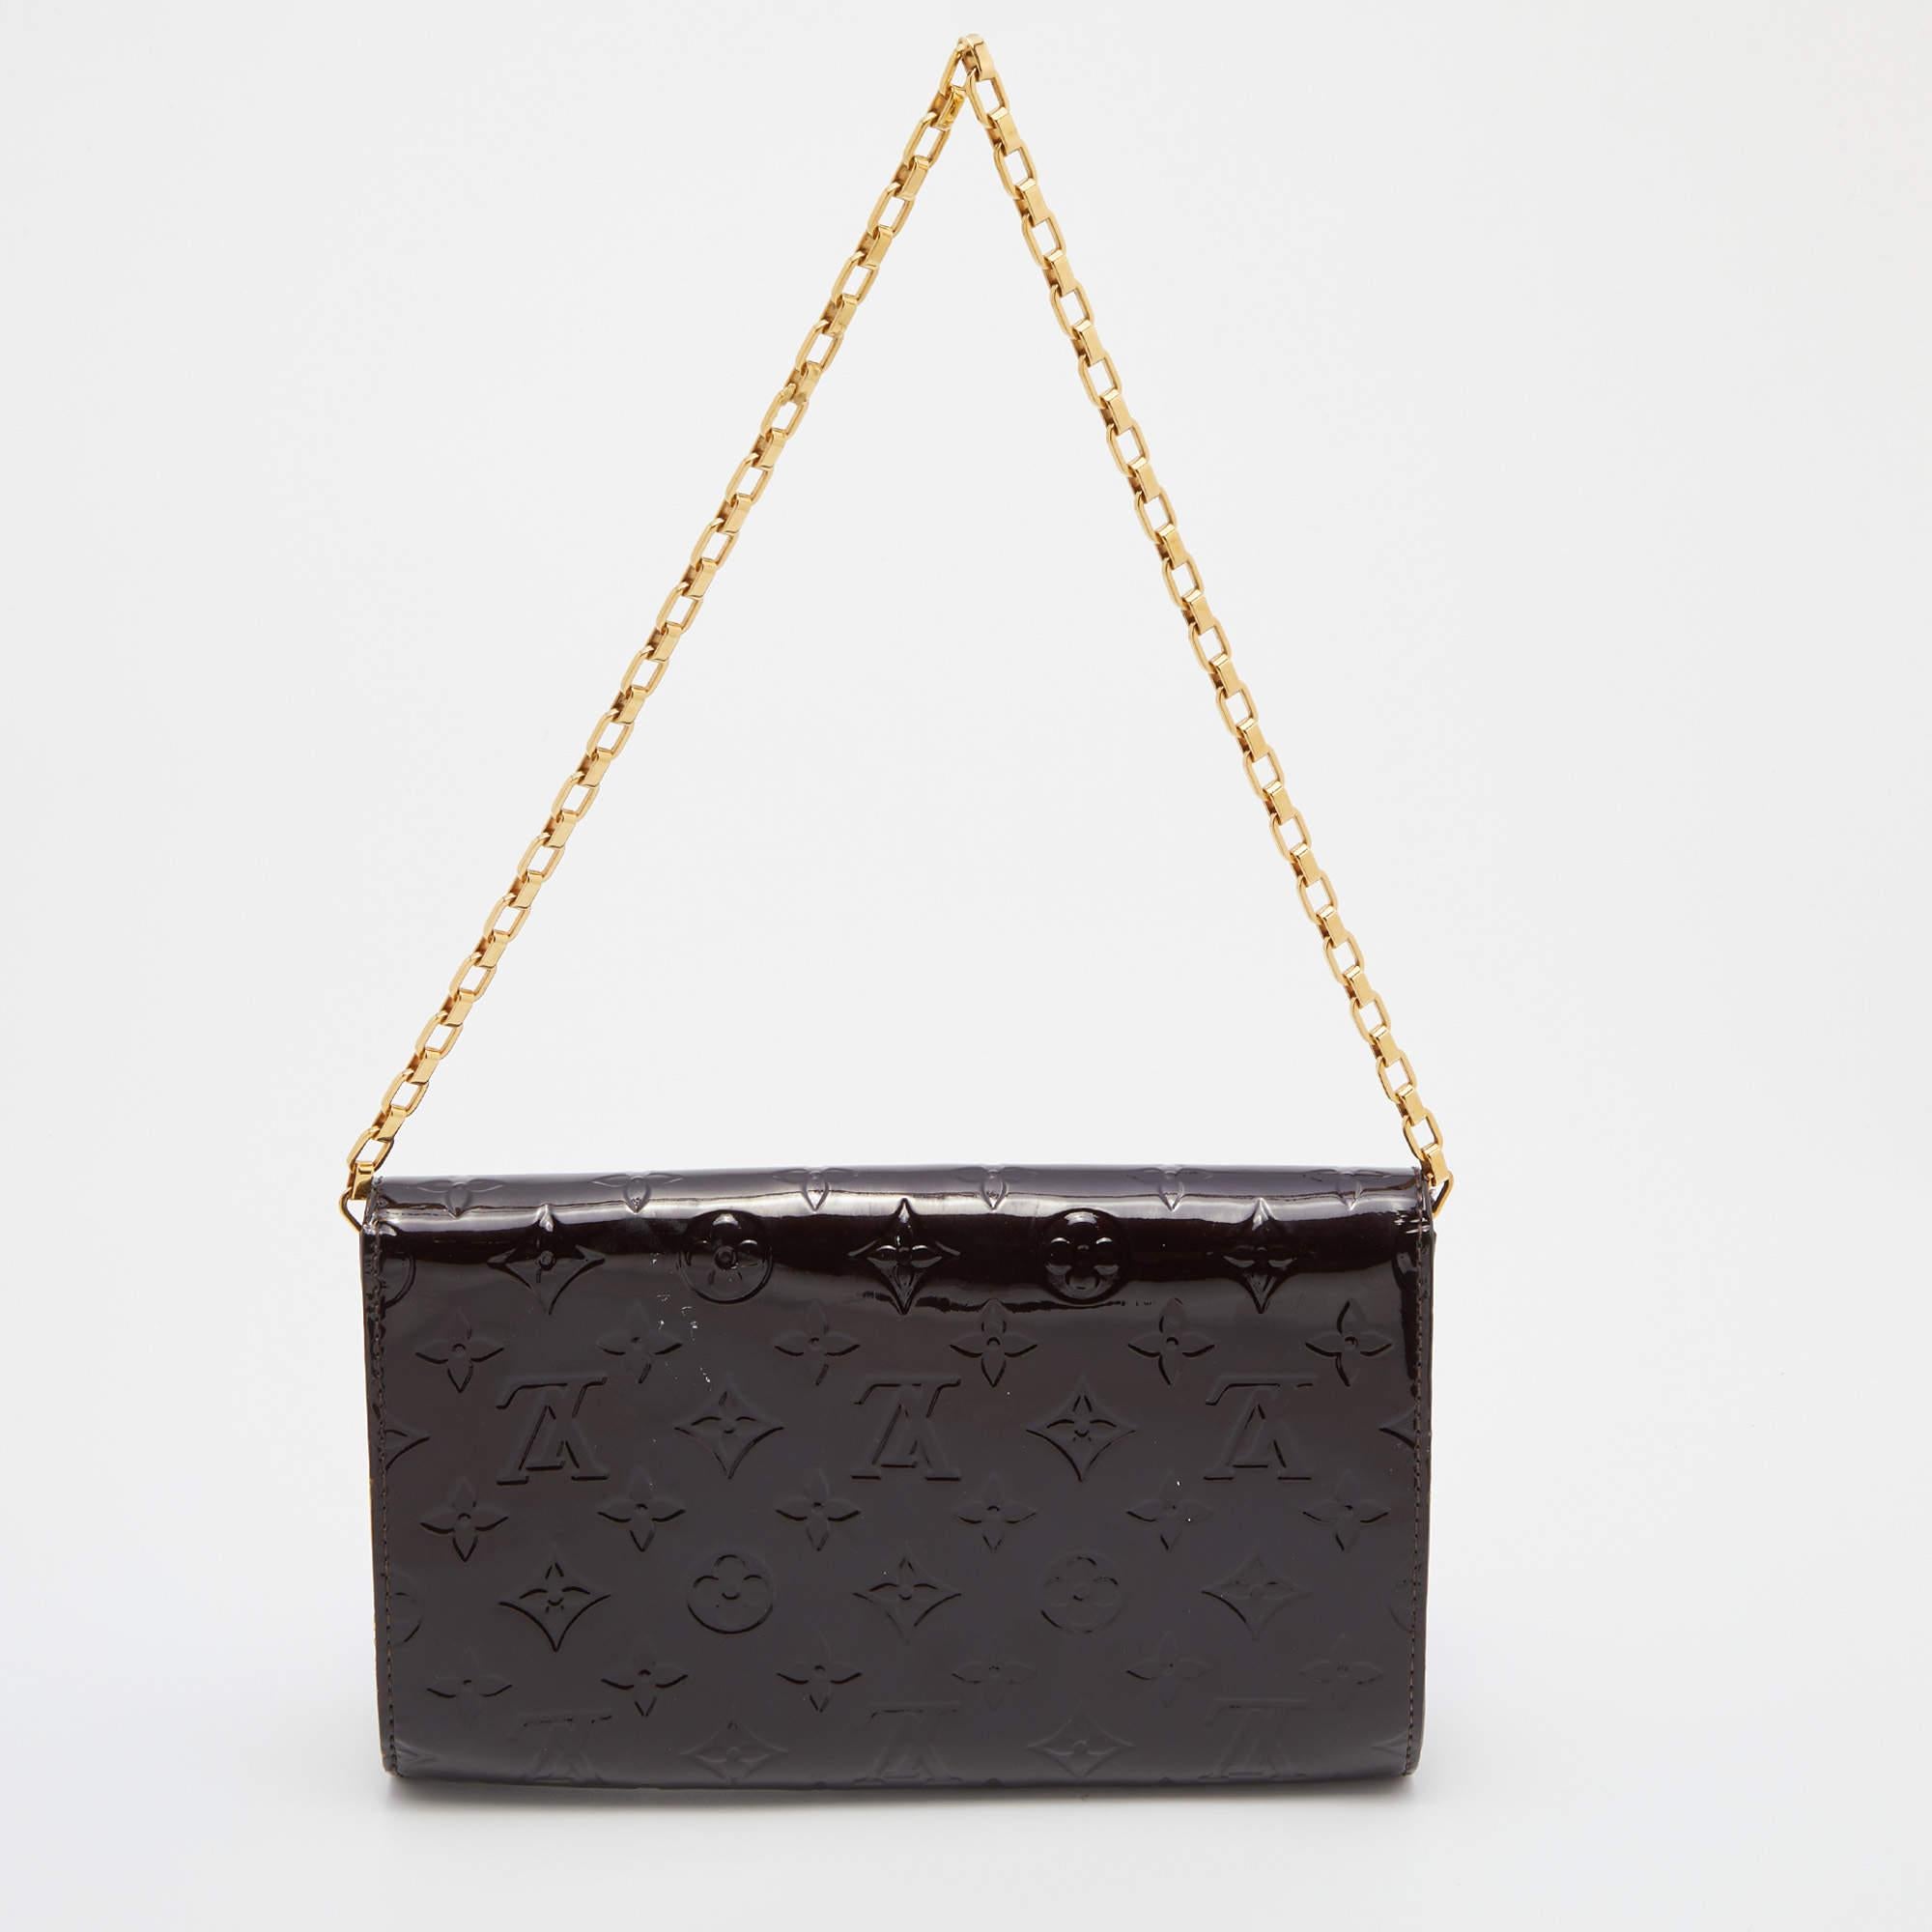 Displaying a graceful silhouette and a sturdy design, this fascinating chain clutch from Louis Vuitton rightly represents the brand's skilled flair. It is made from Amarante Monogram Vernis with gold-toned hardware and a chain strap.

Includes: